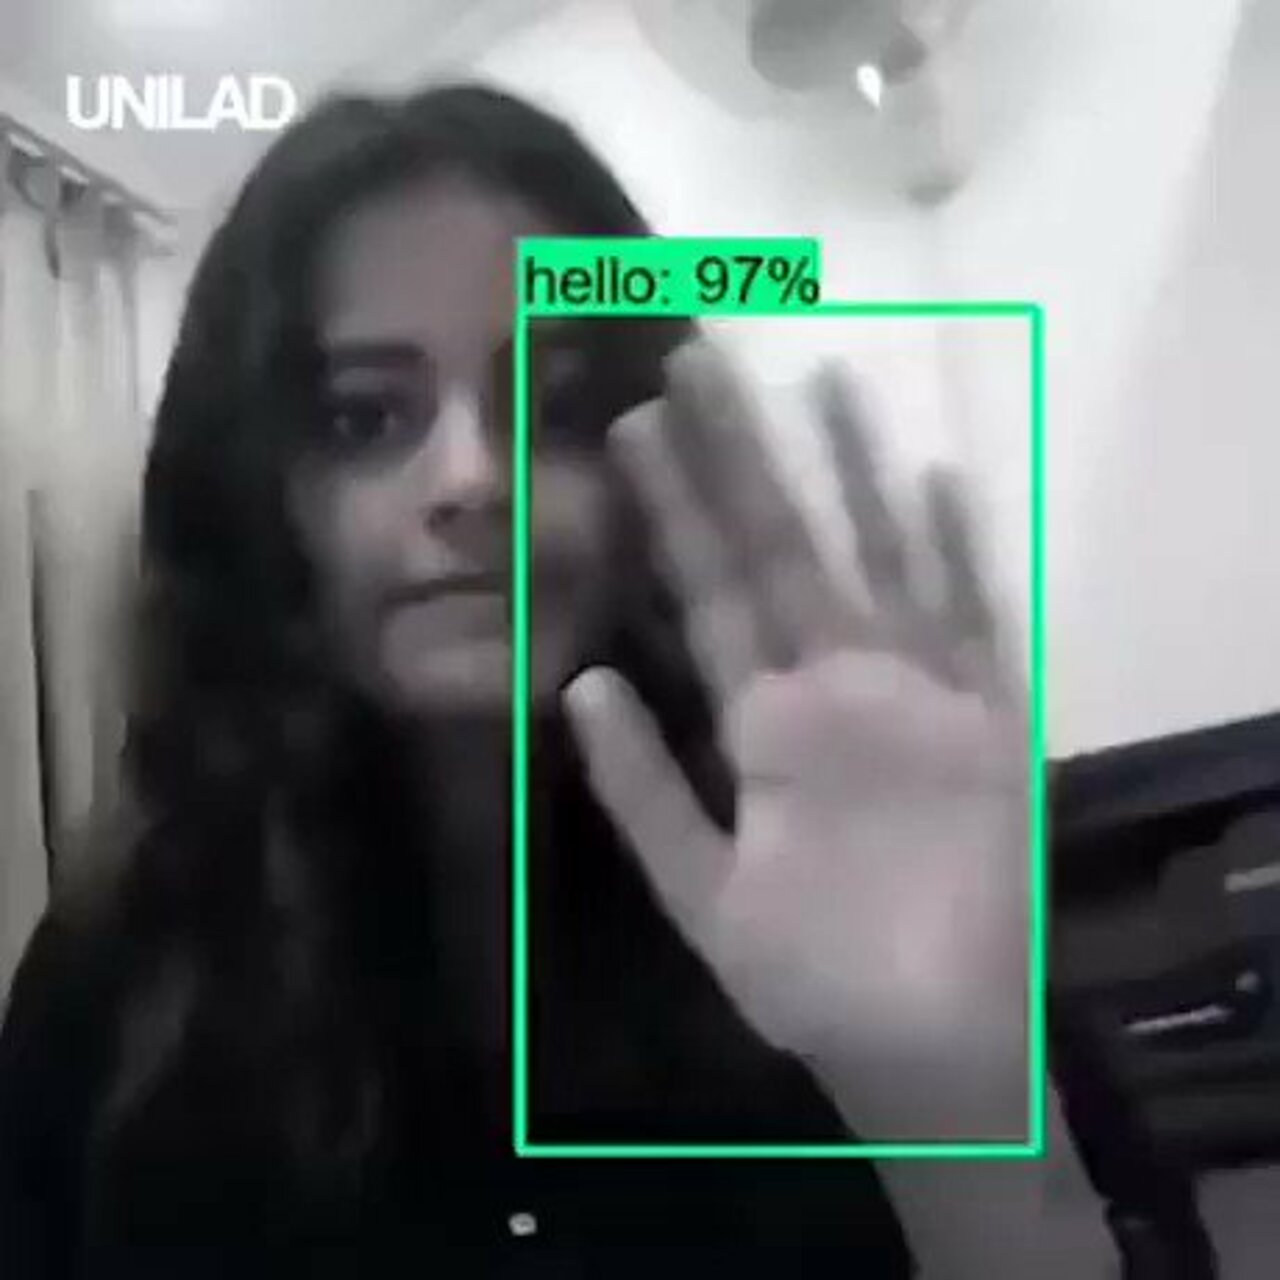 Using #AI to turn sign language into English in real-time by @UNILAD #MachineLearning #ArtificialIntelligence #ML #MI #DL #Tech #Innovation #TechForGood Cc: @dirkschaar @space_mog @maxjcm @ronald_vanloon https://t.co/9yCccD3EmC